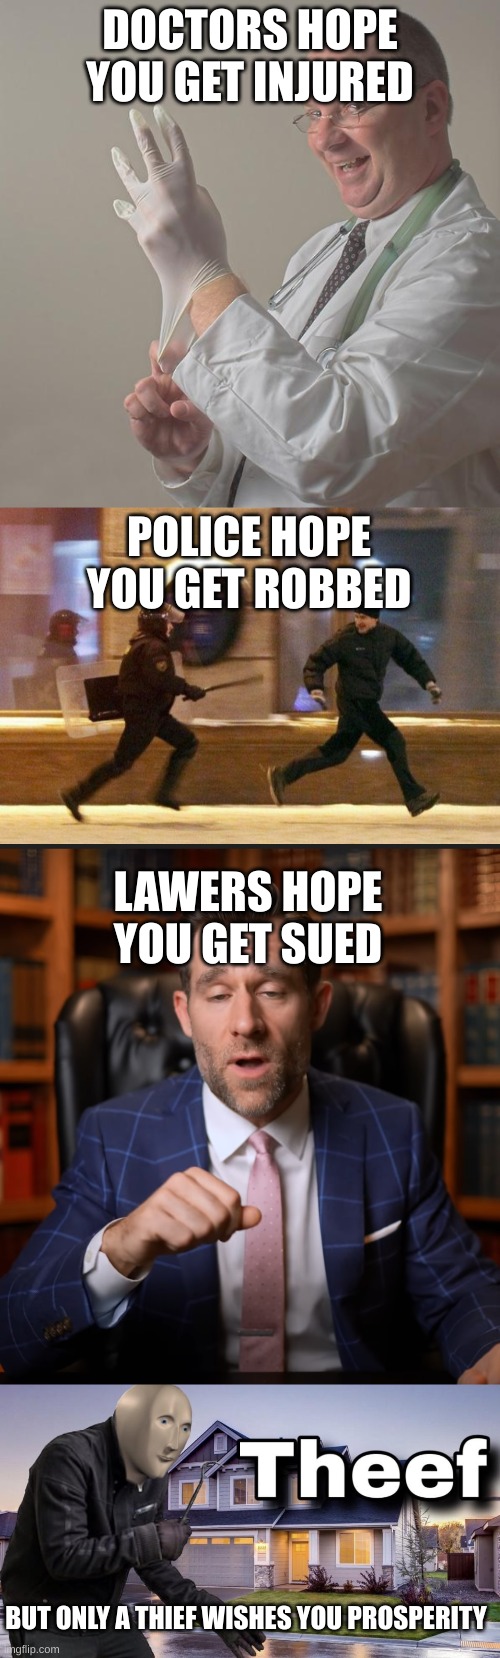 DOCTORS HOPE YOU GET INJURED; POLICE HOPE YOU GET ROBBED; LAWERS HOPE YOU GET SUED; BUT ONLY A THIEF WISHES YOU PROSPERITY | image tagged in insane doctor,police chasing guy,lawer,theef | made w/ Imgflip meme maker